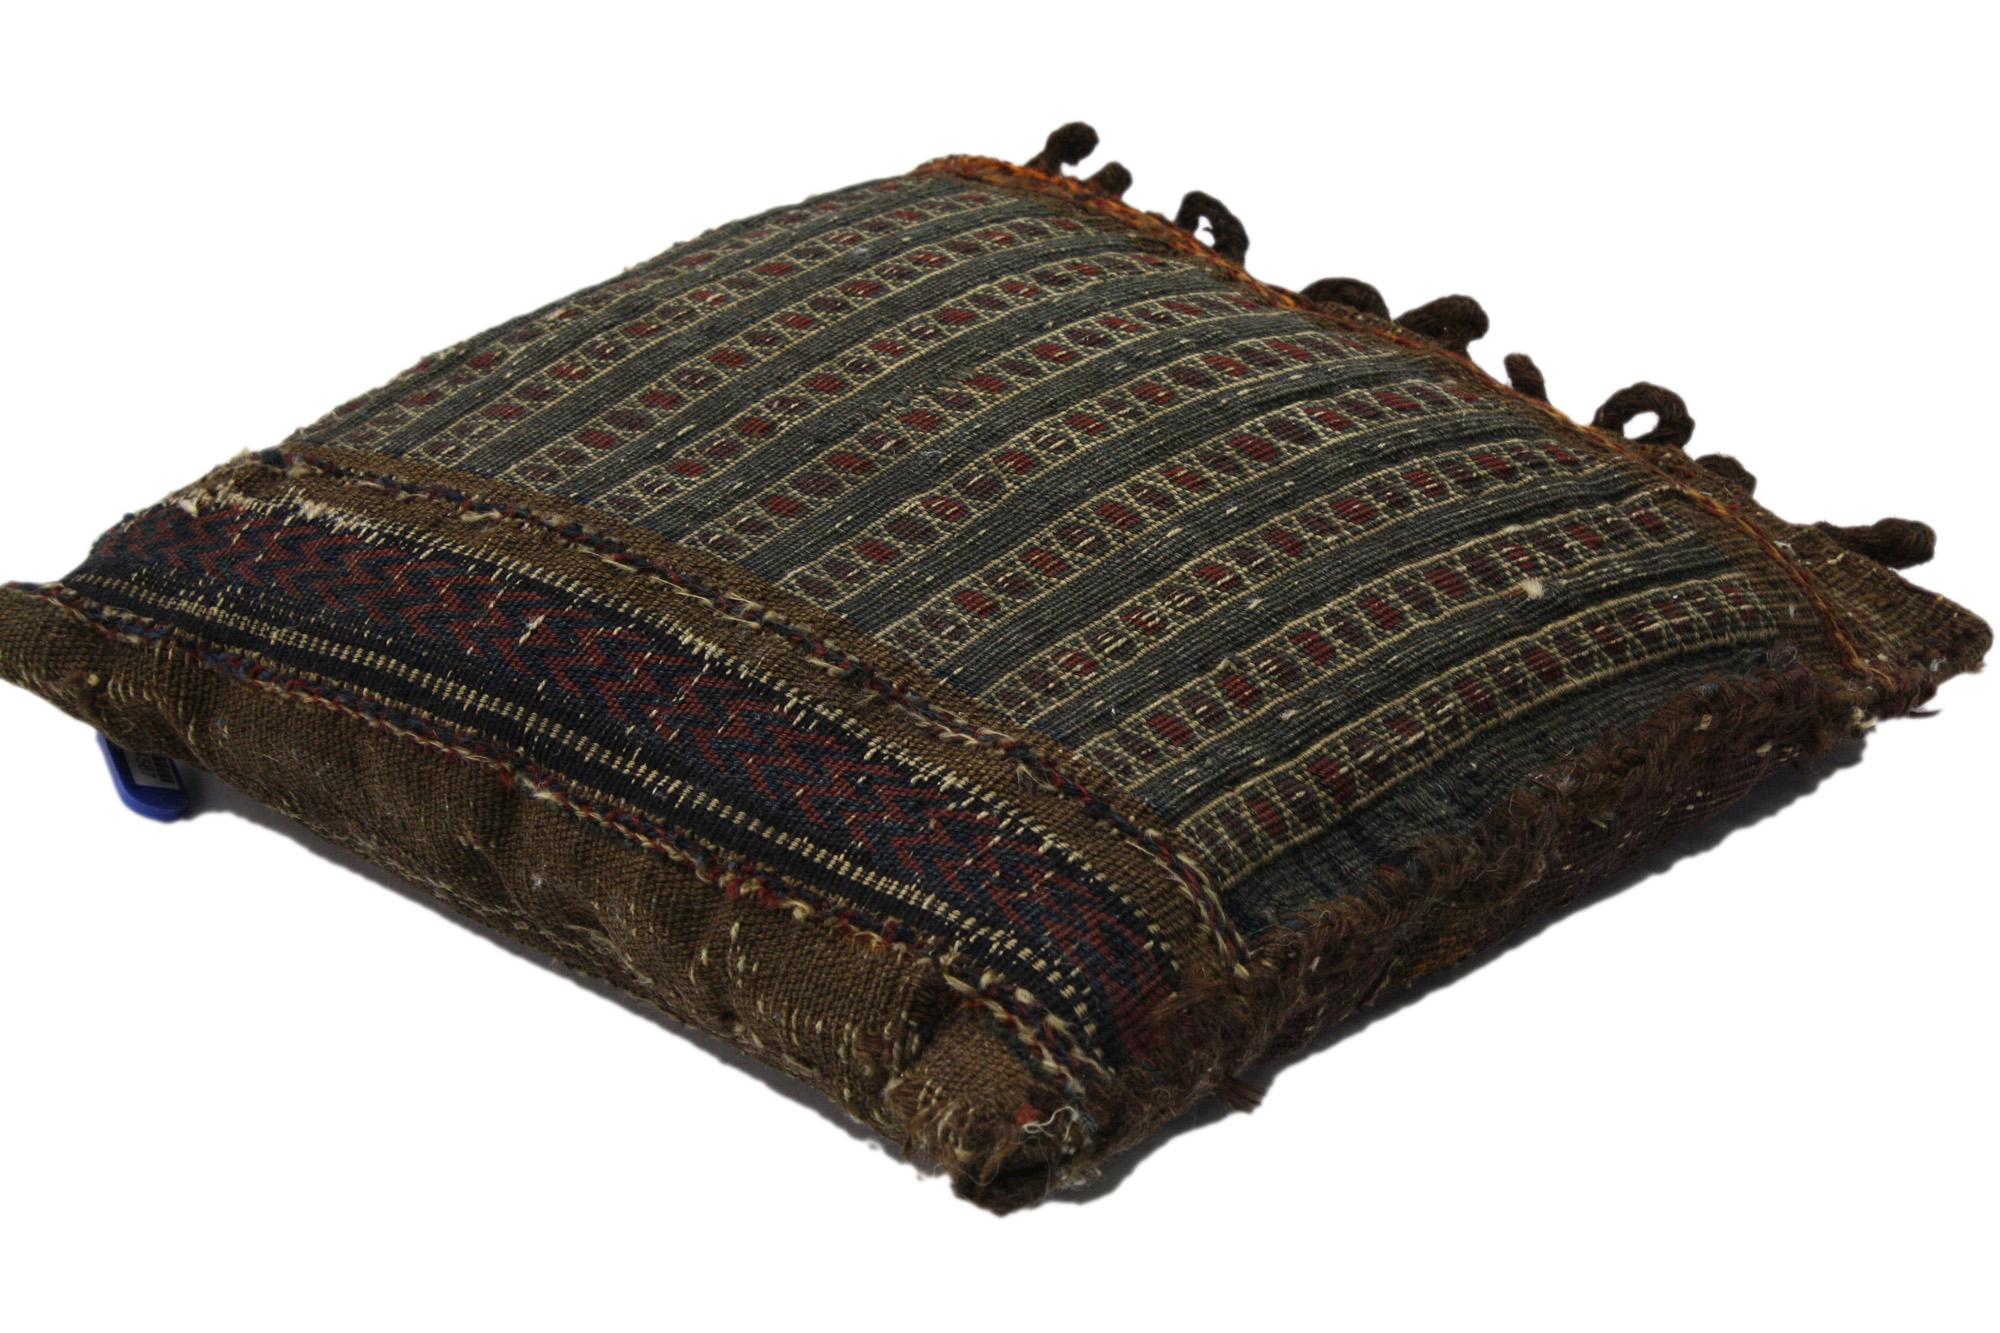 74587 Antique Afghan Rug Pillow, 01'01 x 01'04. Small Afghan pillows, often called Afghan kilim pillows or cushion covers, are decorative items made from handwoven kilims, which are flatwoven carpets. These pillows feature traditional Afghan designs